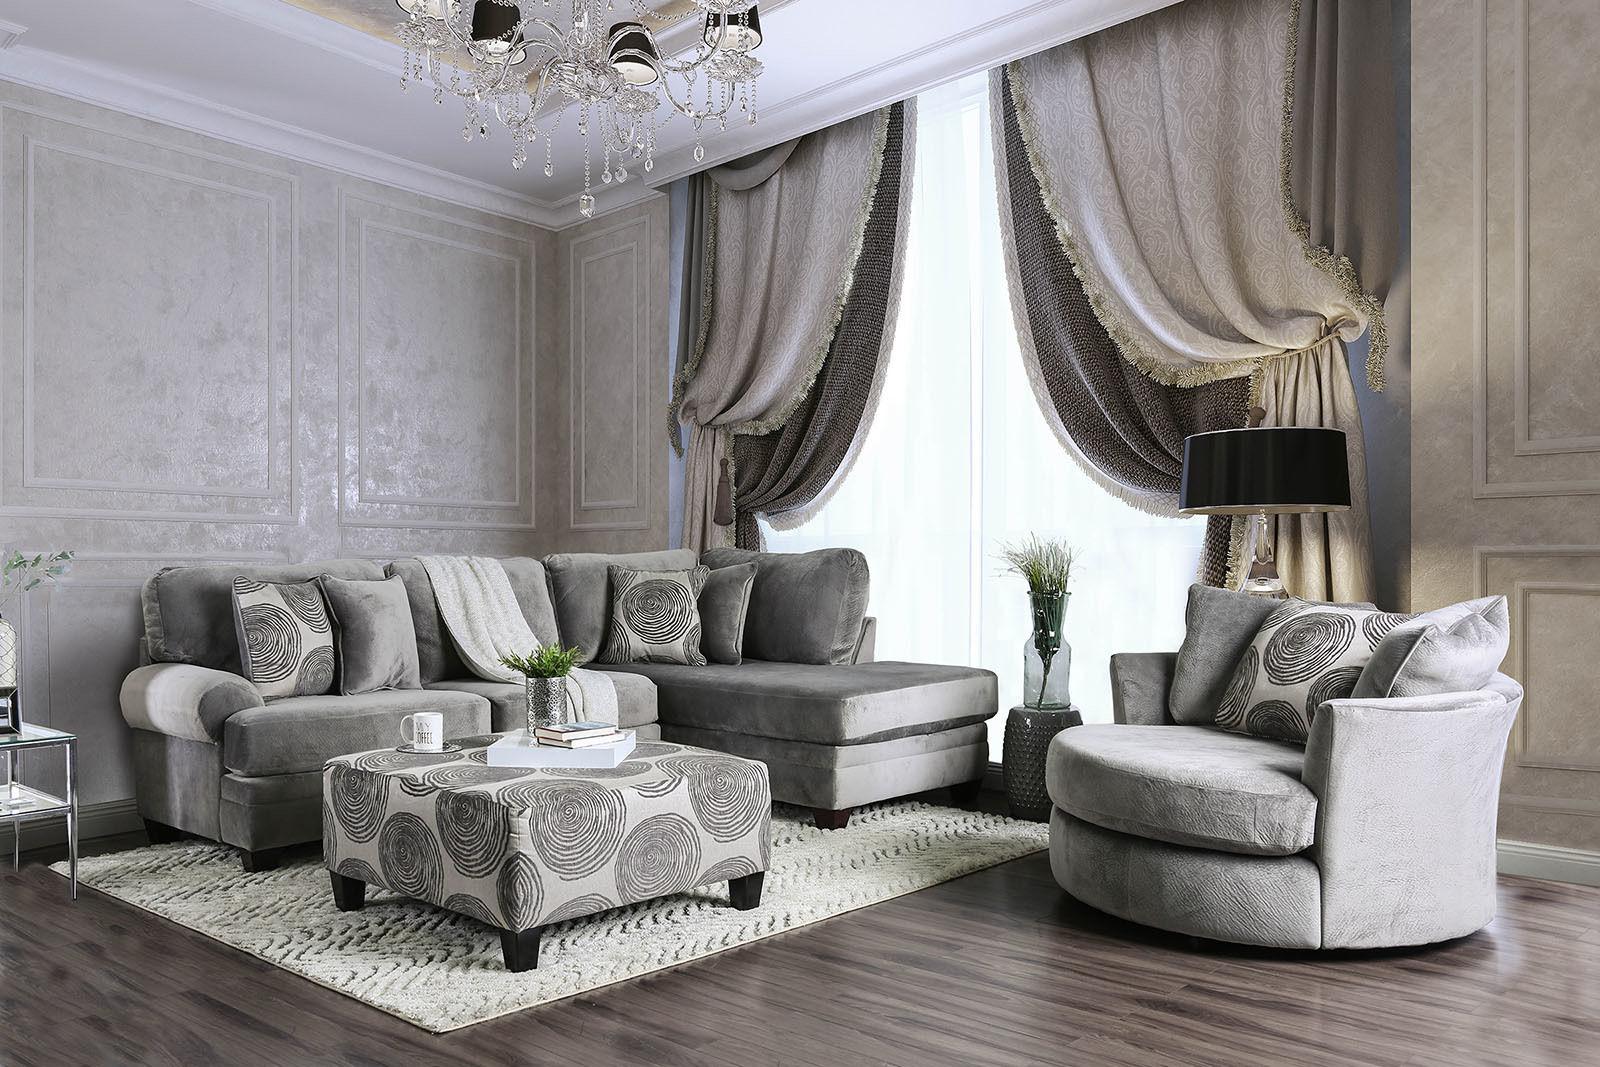 Transitional Sectional Sofa and Chair SM5143GY-2PC Bonaventura SM5143GY-2PC in Gray Microfiber